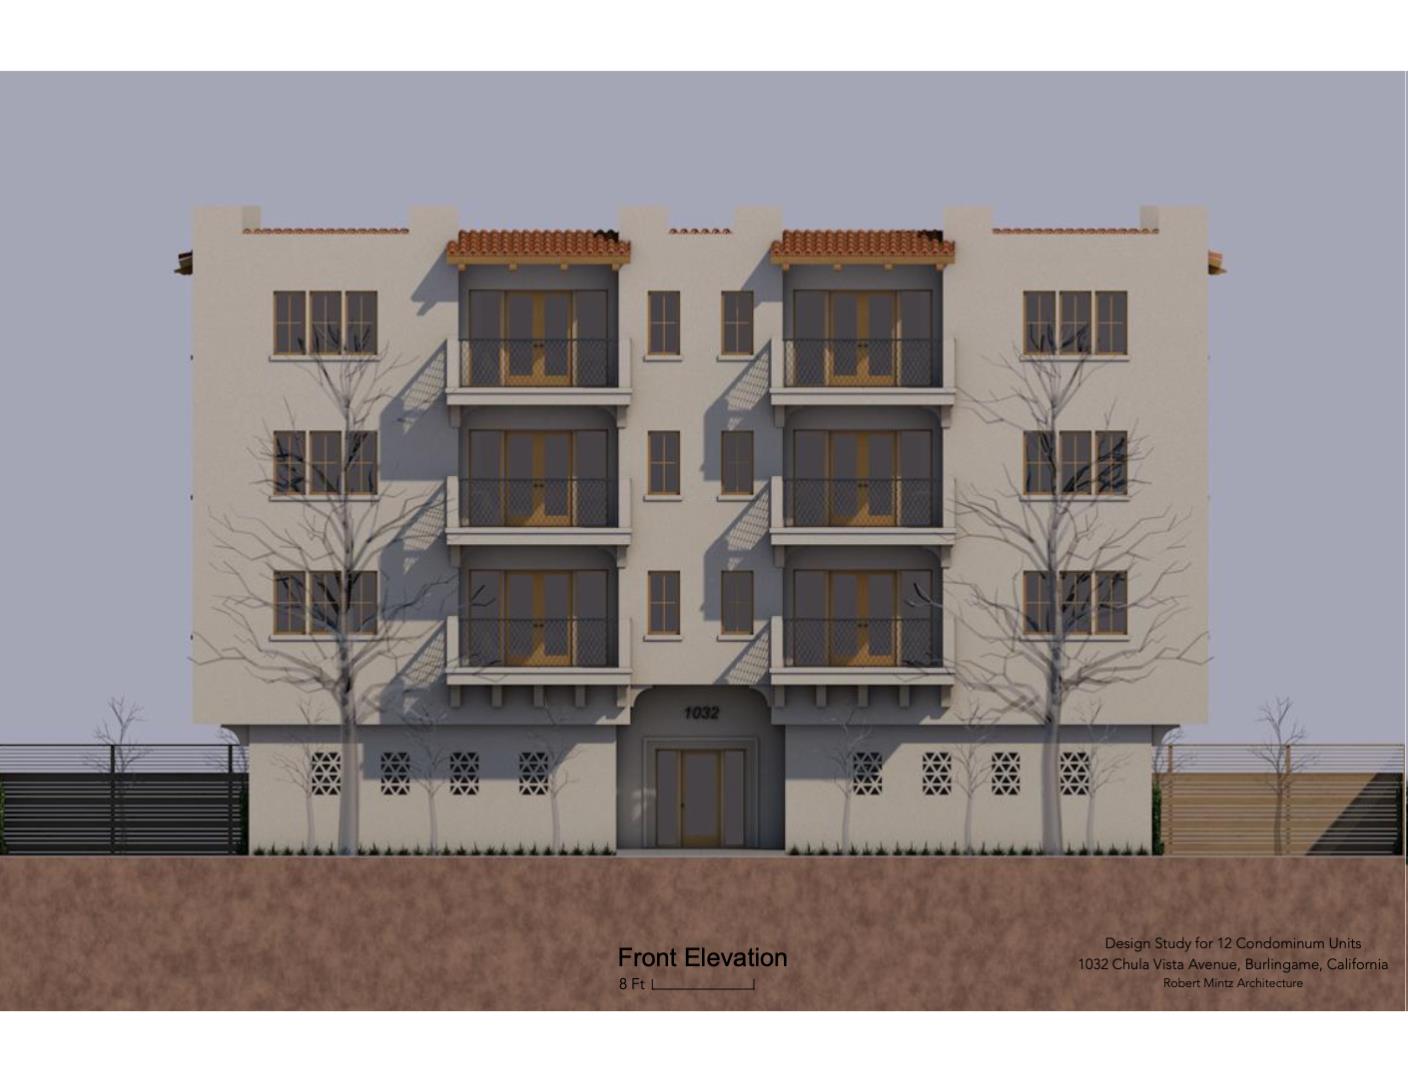 Rare 12 unit condo project in desirable Burlingame.  This 4 story development opportunity located at 1034-1030 Chula Vista Ave consists of (6) 2 bed 2 bath units with full kitchen at 1266 sq. ft. and (6)  1 bed 2 bath with private den at 1051 sq. ft. with private balconies. This highly sought after location feeds to excellent schools, retail corridors of Downtown Burlingame and El Camino Real, conveniently located to all that Silicon Valley has to offer. Single family home being sold with the a joining home both lots are 5750 sq ft and zoned R3.  1034 is in good condition and remodeled could rent for $4200 to $4800. 1030 is a 2 bed 1 bath home is a fixer, could be fixed and rented.